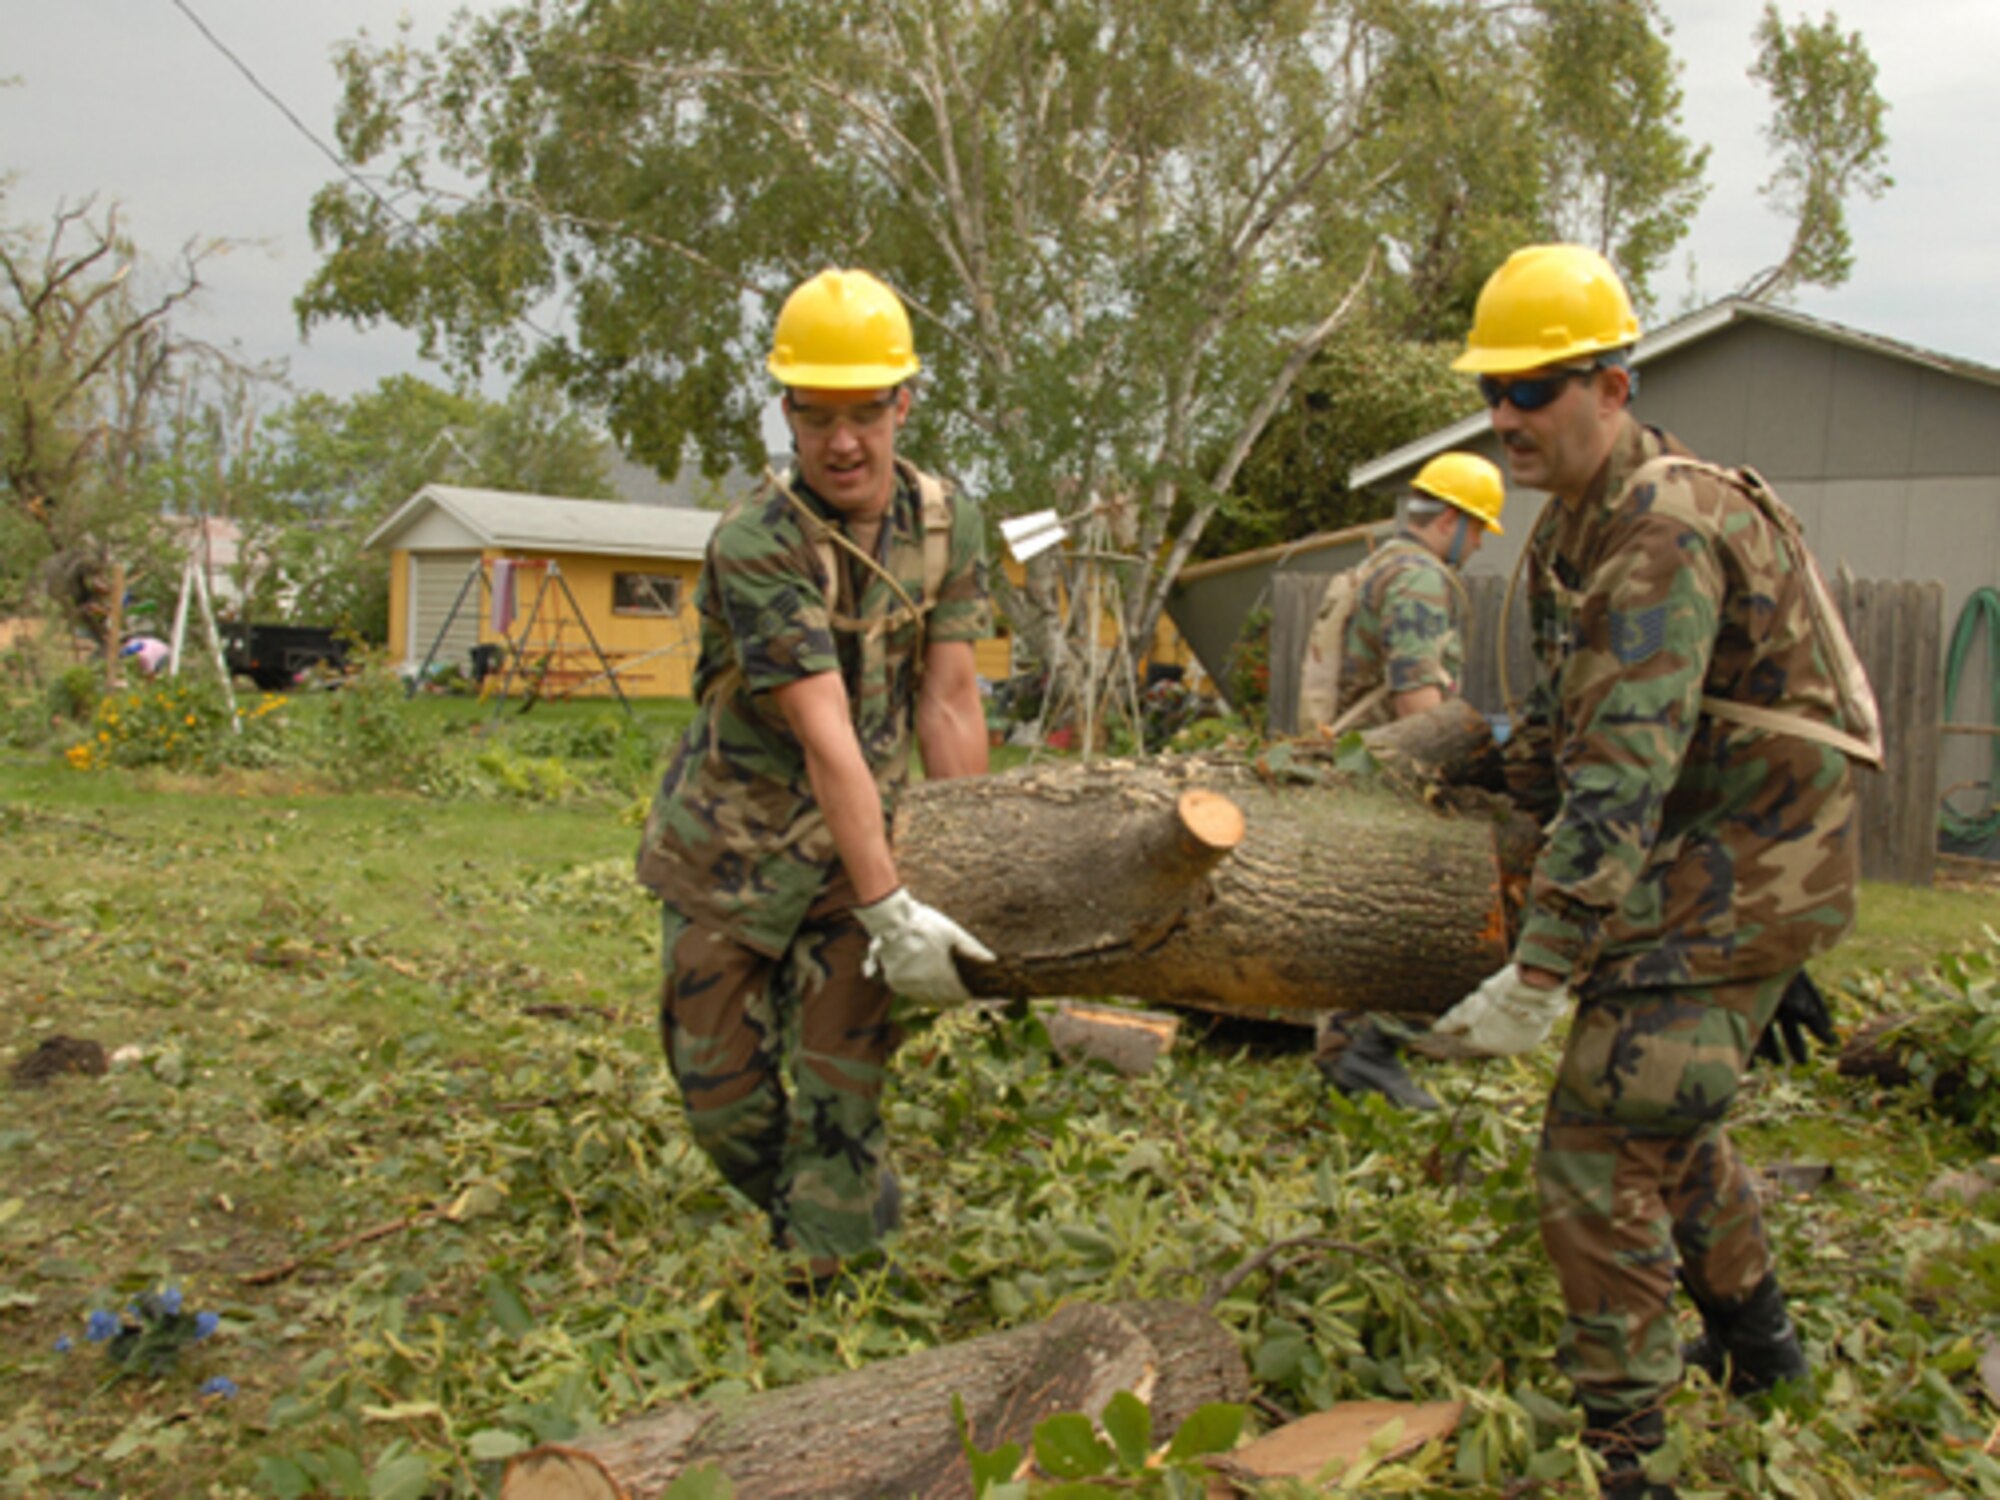 Senior Airman Brandon W. Miller, left, and Tech. Sgt. Richard M. Hayes, both of the 119th Wing, remove fallen tree branches and debris from yards in order to clear a path for power line workers in Northwood, N.D. Aug. 28.  The fallen trees are a result of an F4 category tornado that hit Northwood, N.D., in the early evening hours of Sunday, Aug. 26. (USAF photo/Senior Master Sgt. David H. Lipp)